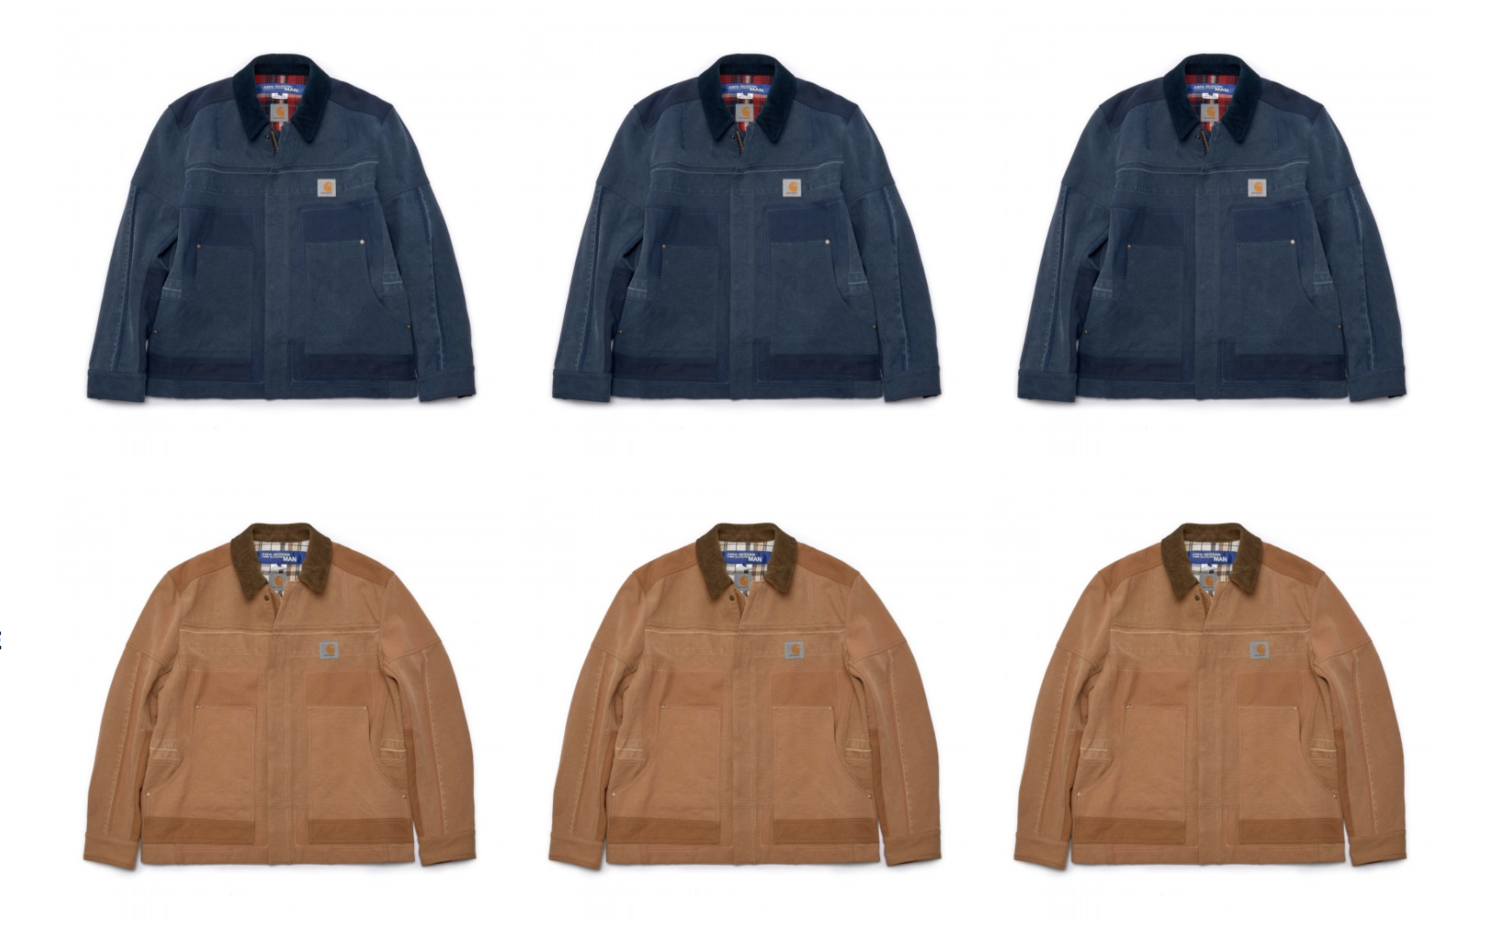 Junya Watanabe MAN and Carhartt releases first items from it's 